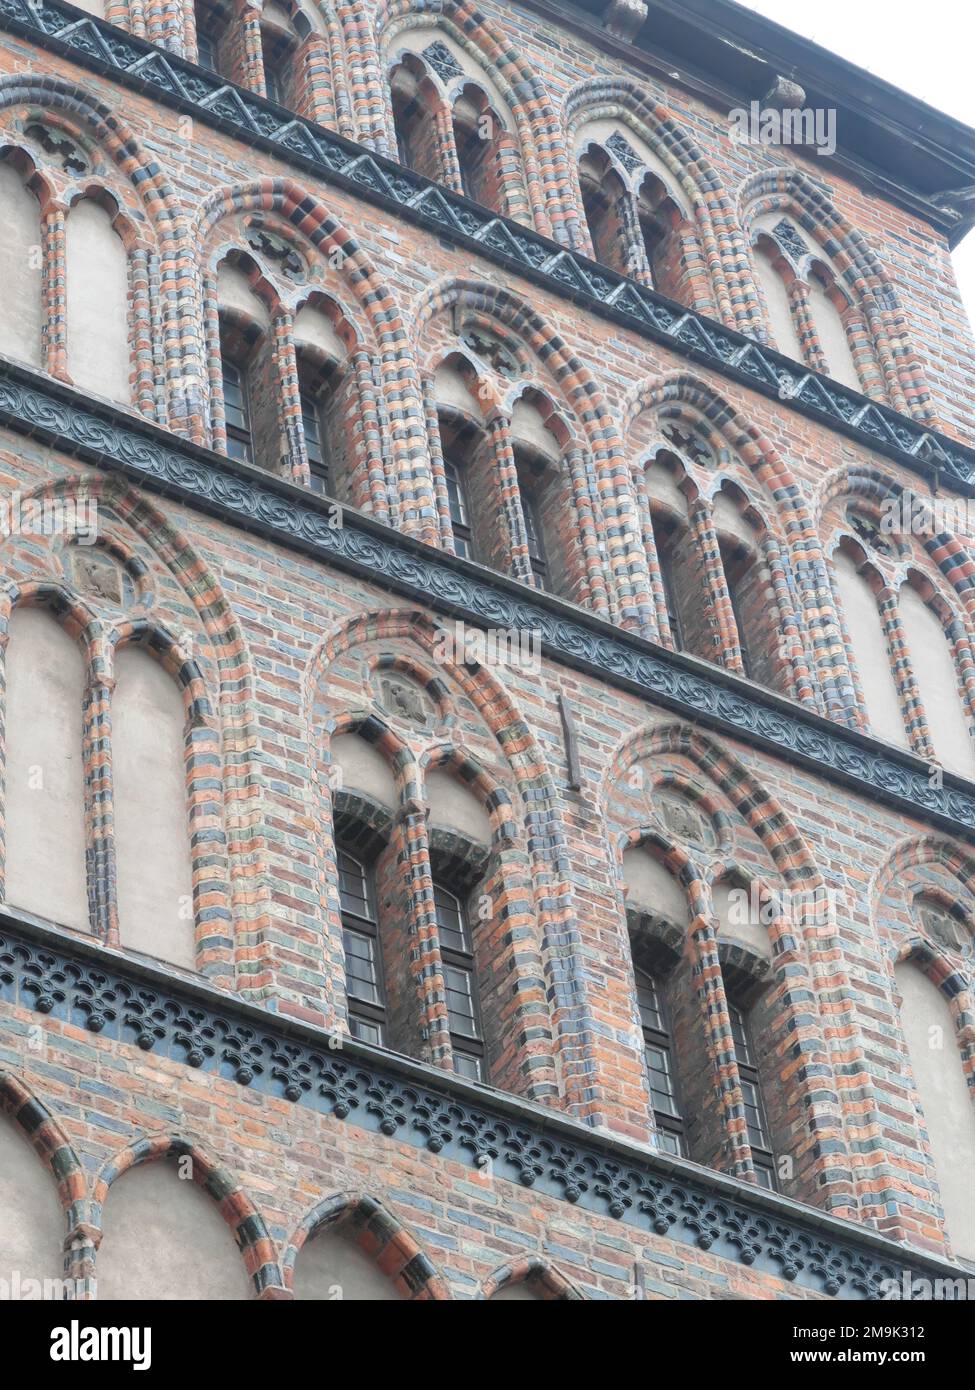 Gothic pointed arch windows on a clinker brick house in the city center of the Hanseatic city of Lübeck Germany Stock Photo